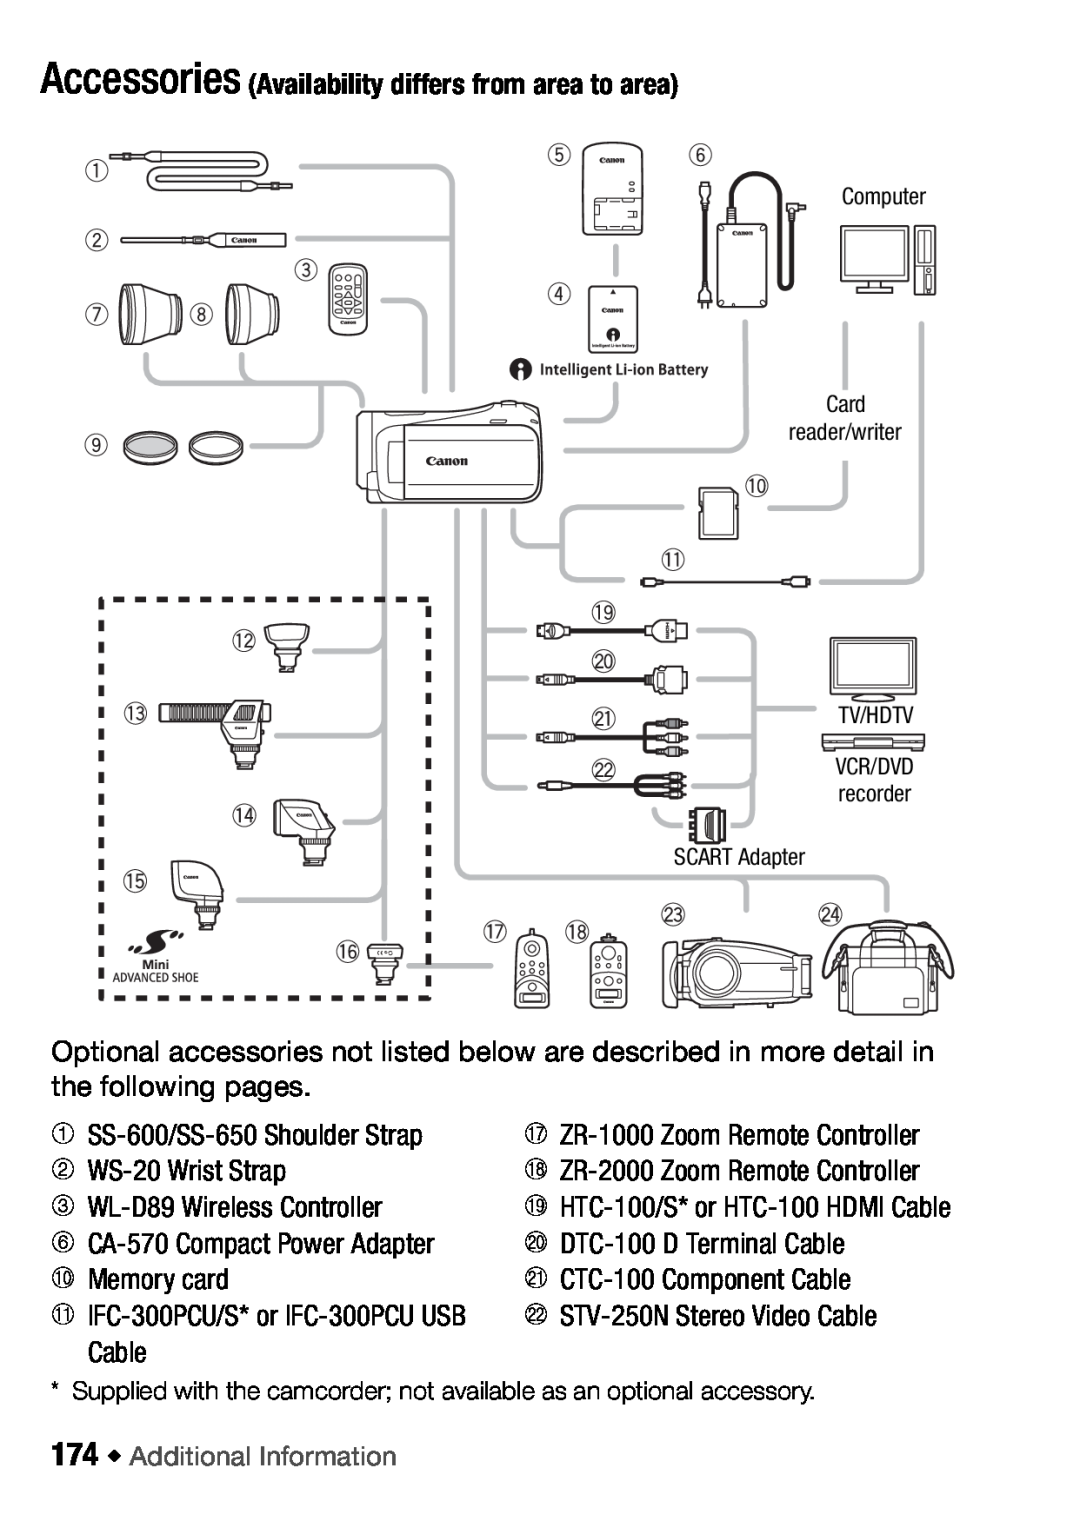 Canon HFM406, HFM46 instruction manual Accessories Availability differs from area to area 